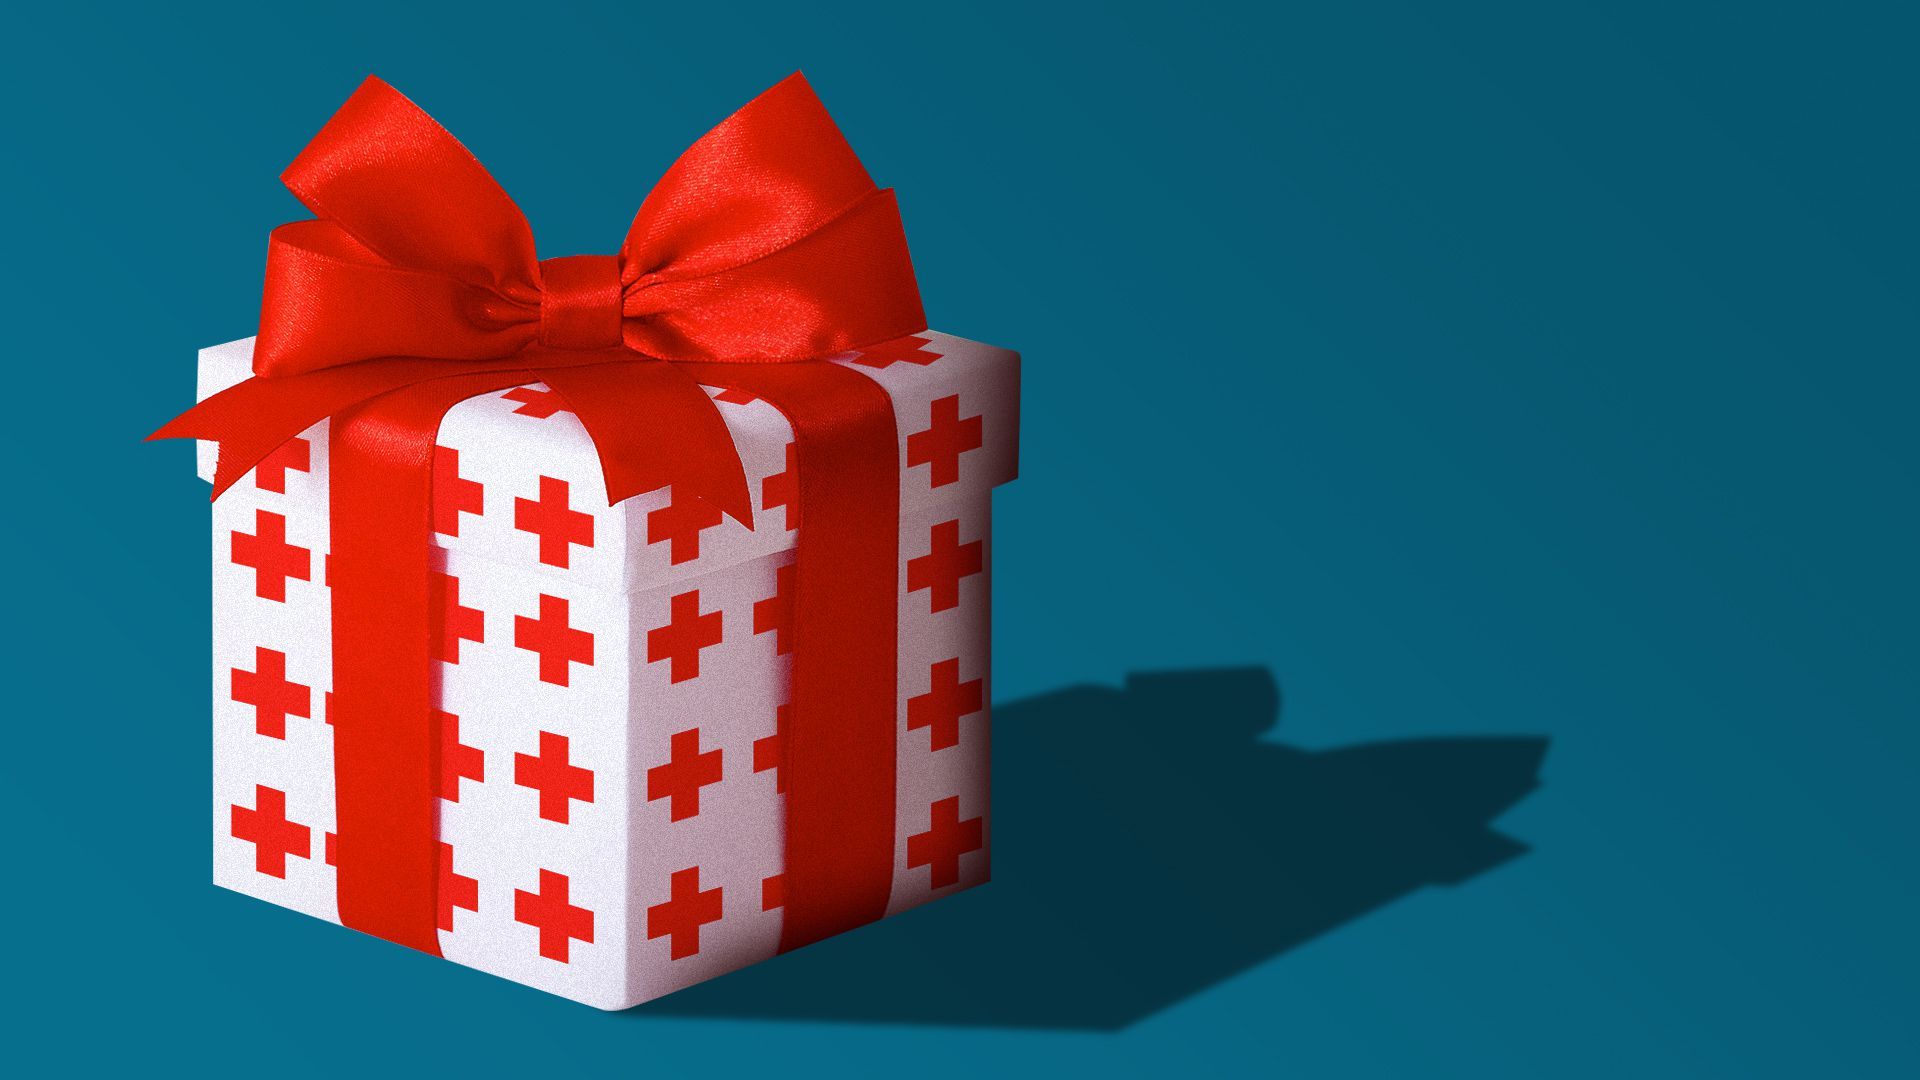 Illustration of a gift box wrapped in wrapping paper with a health plus pattern on it. 